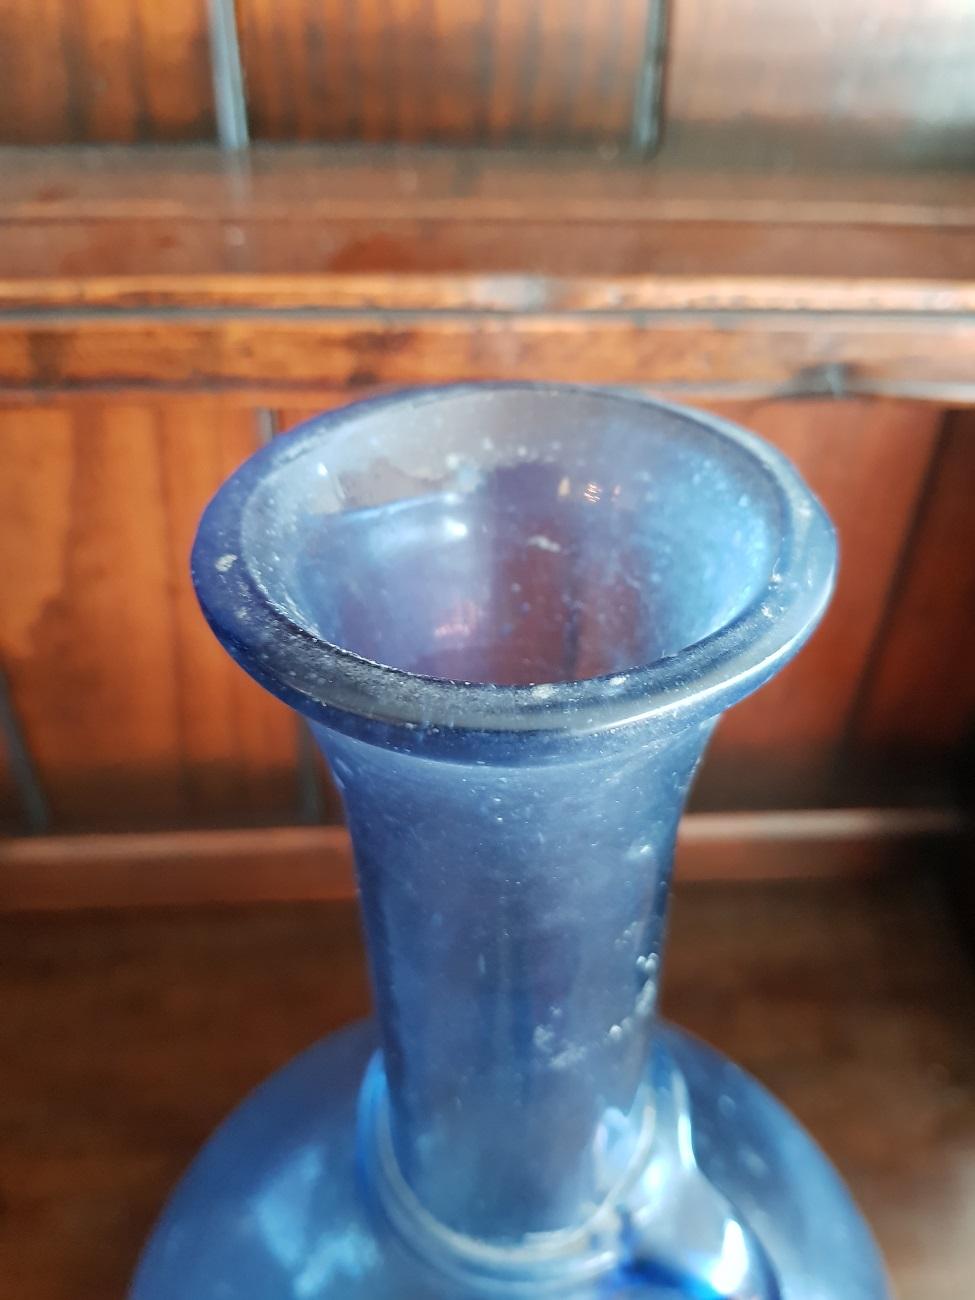 19th century handblown blue jug with a beautiful fitted ear which revolves around the neck, slight traces of use but no cracks or chips.

The measurements are:
Depth 21 cm/ 8.2 inch.
Width 21 cm/ 8.2 inch.
Height 35 cm/ 13.7 inch.